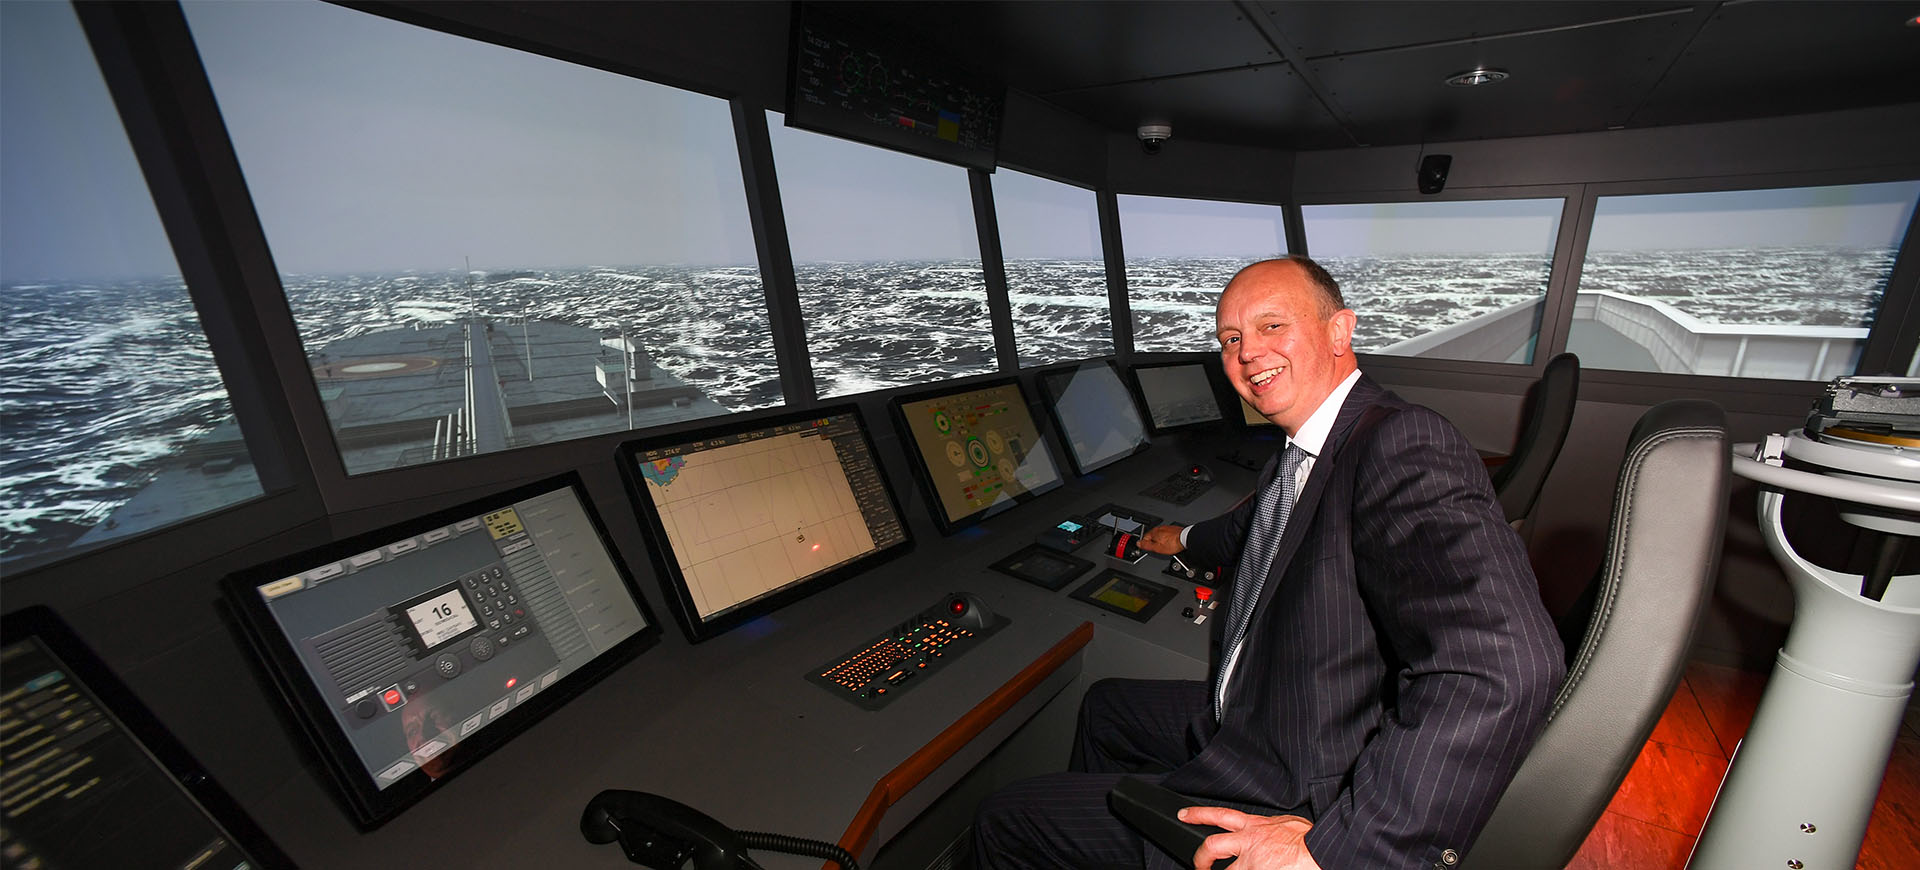 Opening of the maritime simulation centre